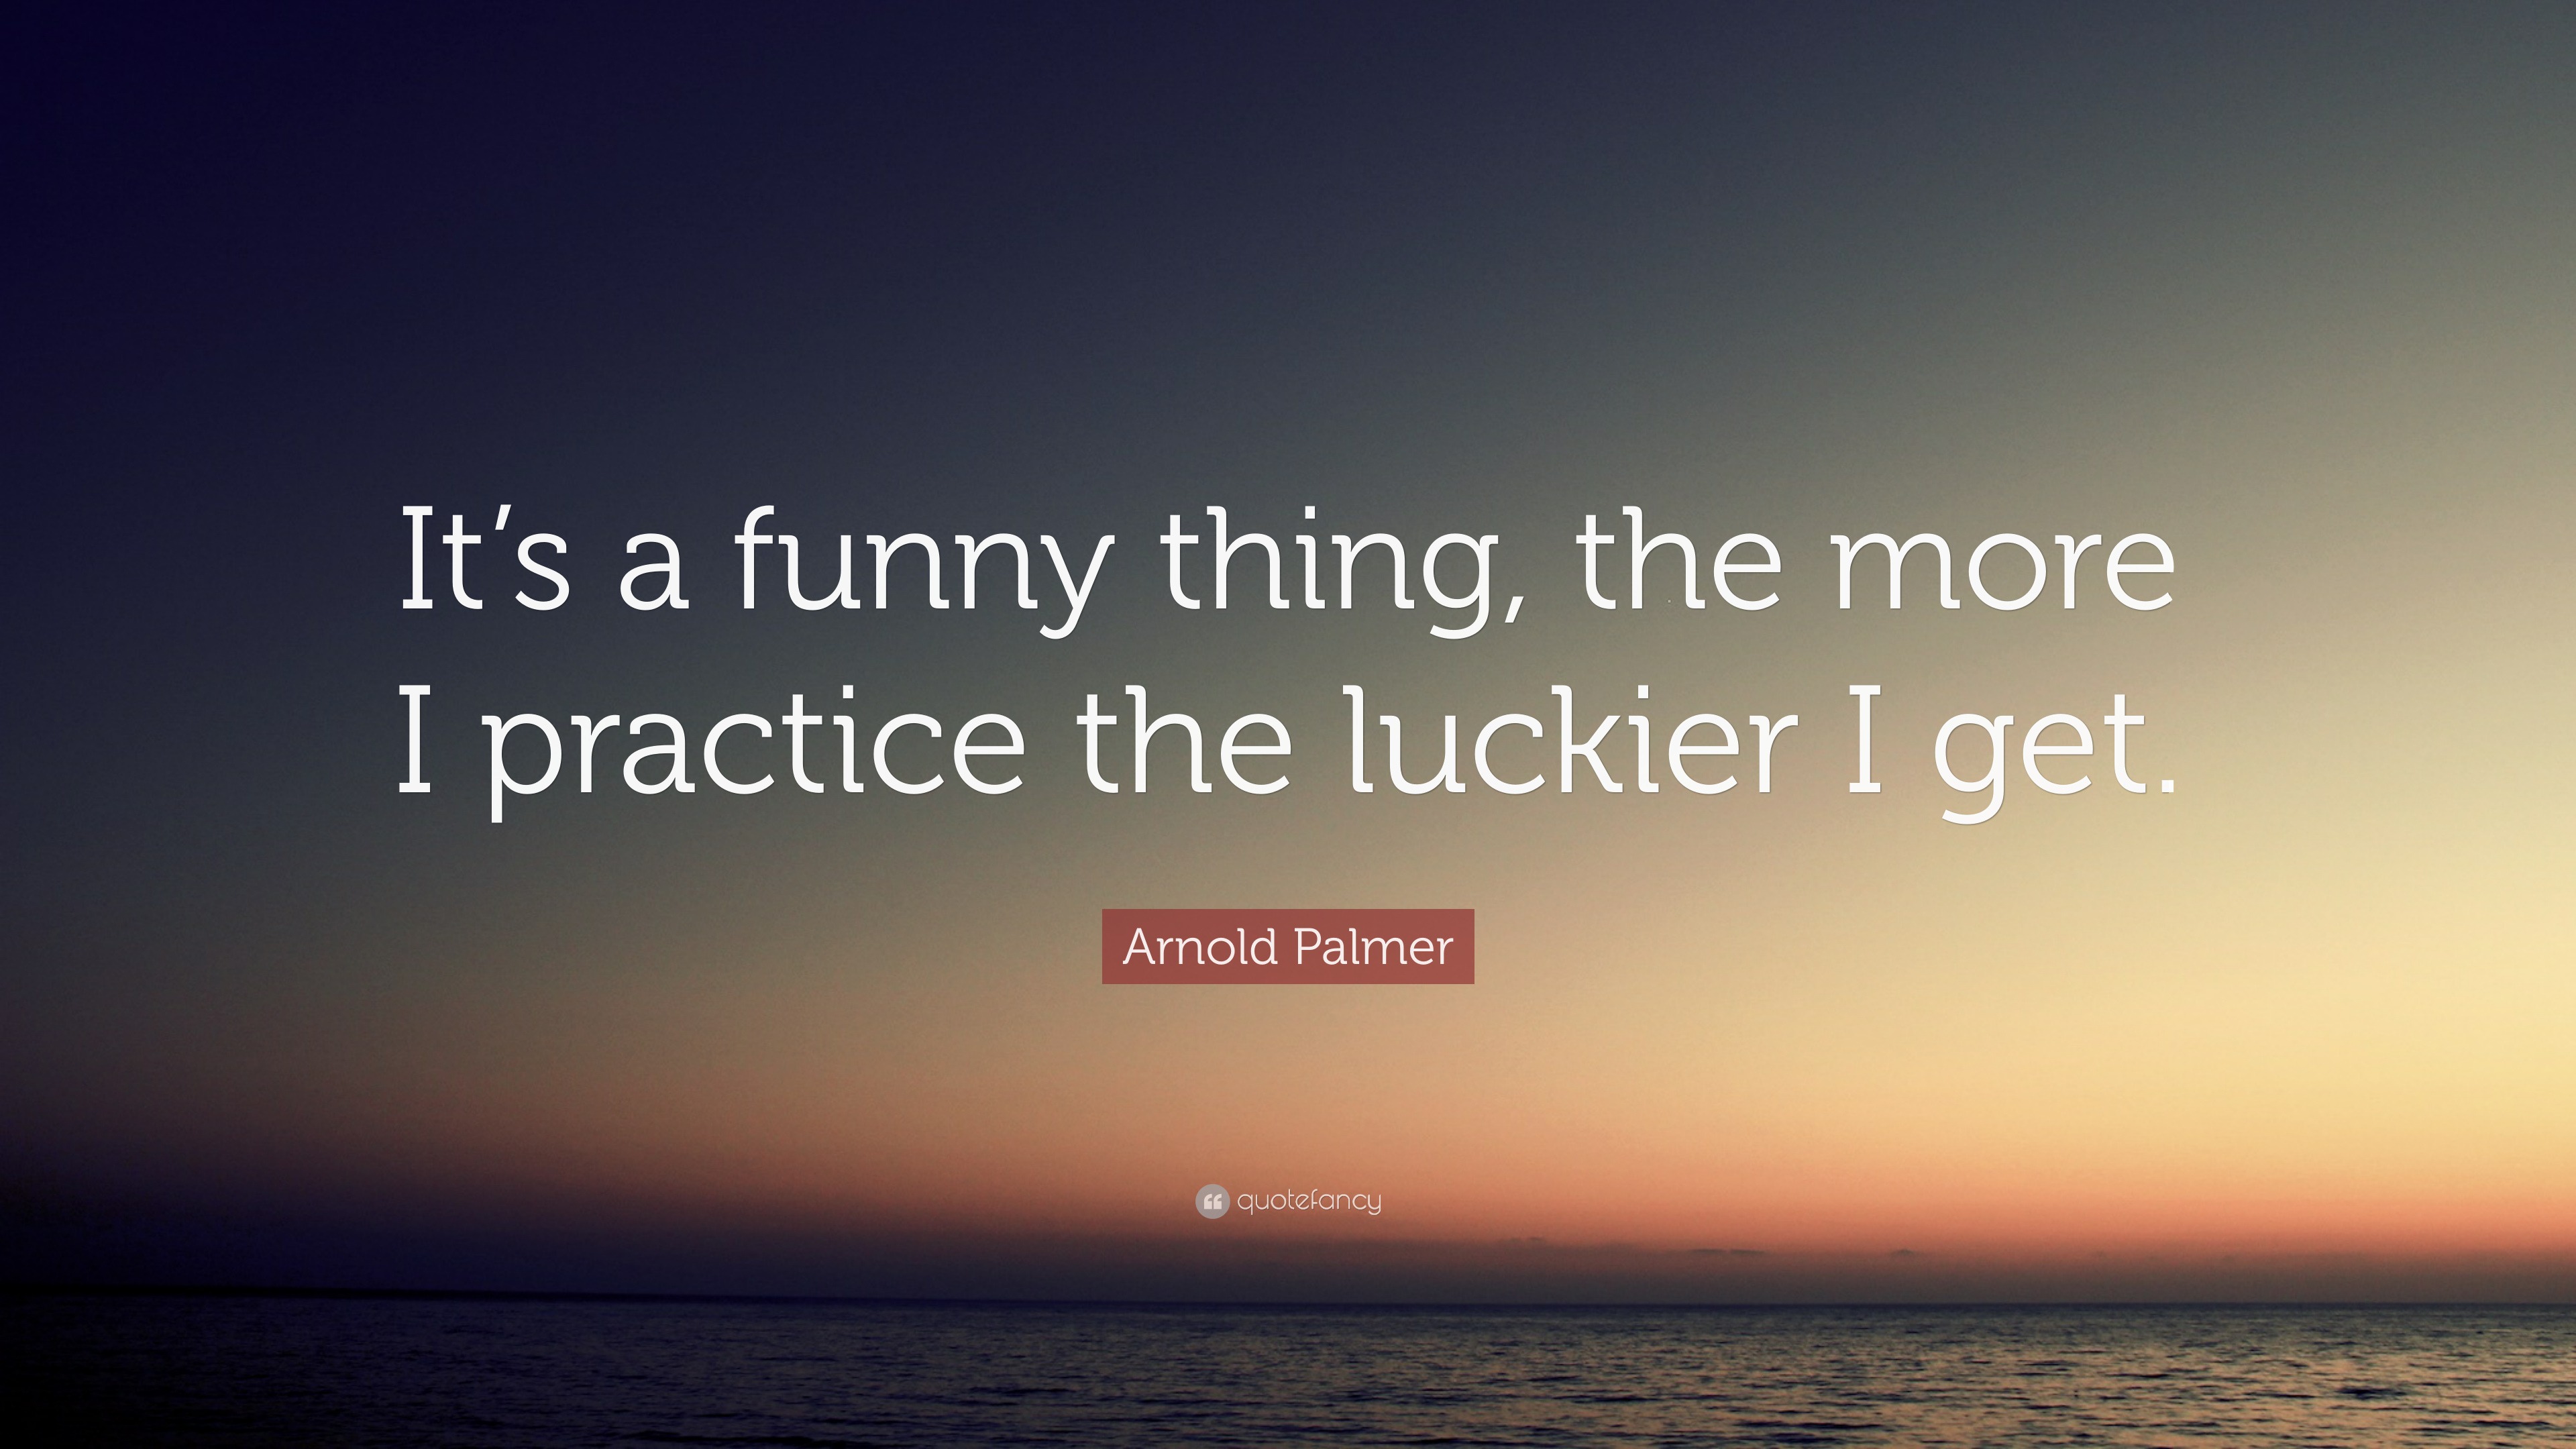 Arnold Palmer Quote: “It's A Funny Thing, The More I Practice The Luckier I Get.”